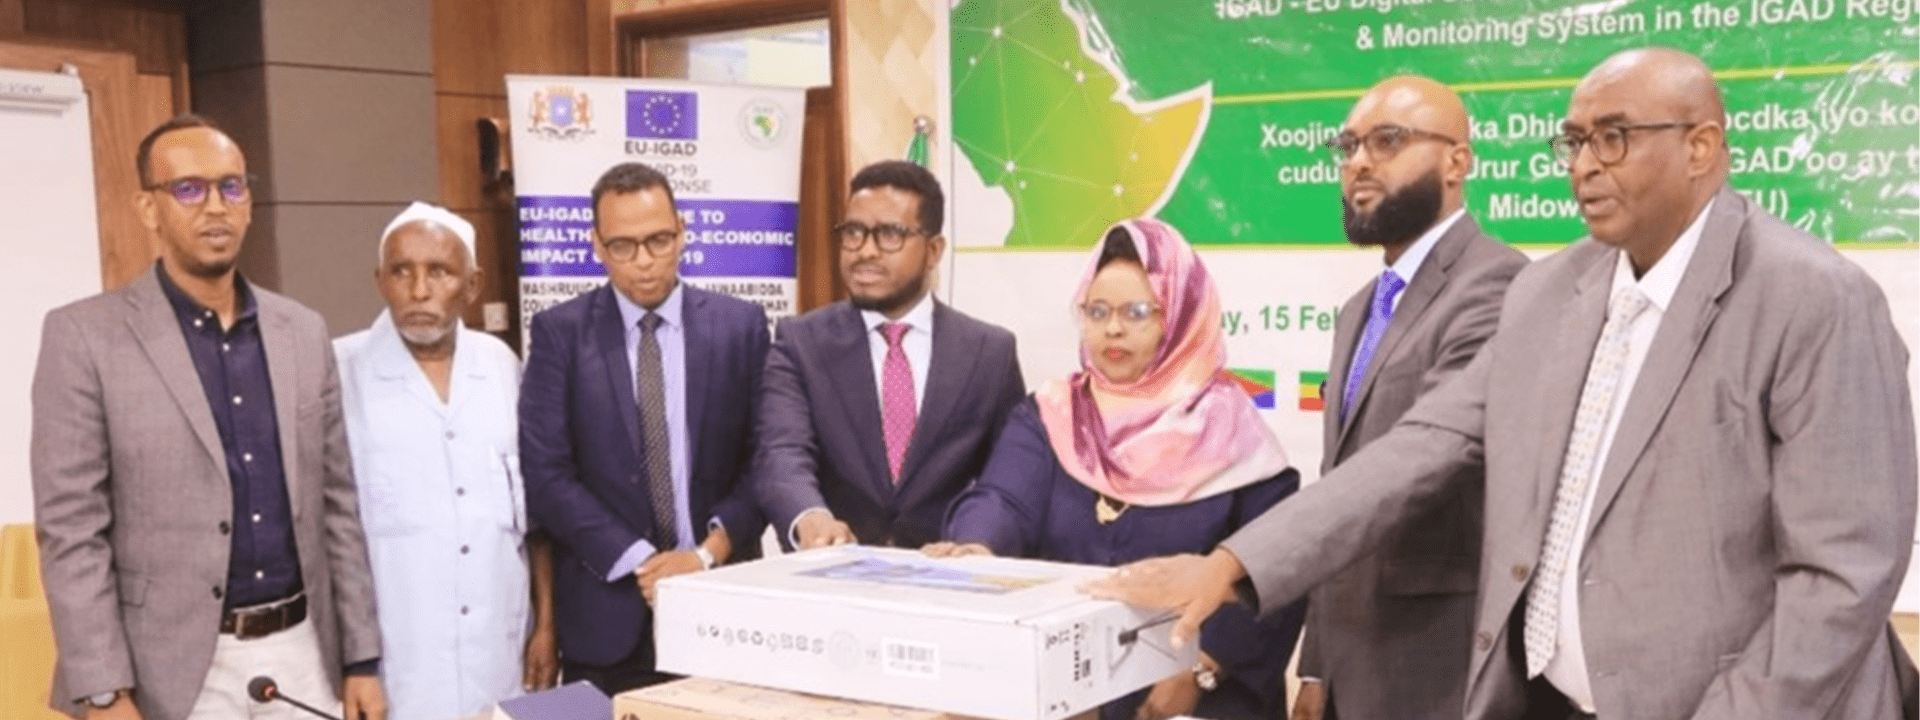 IGAD has handed over IT Hardware to the Somalia’s MOH